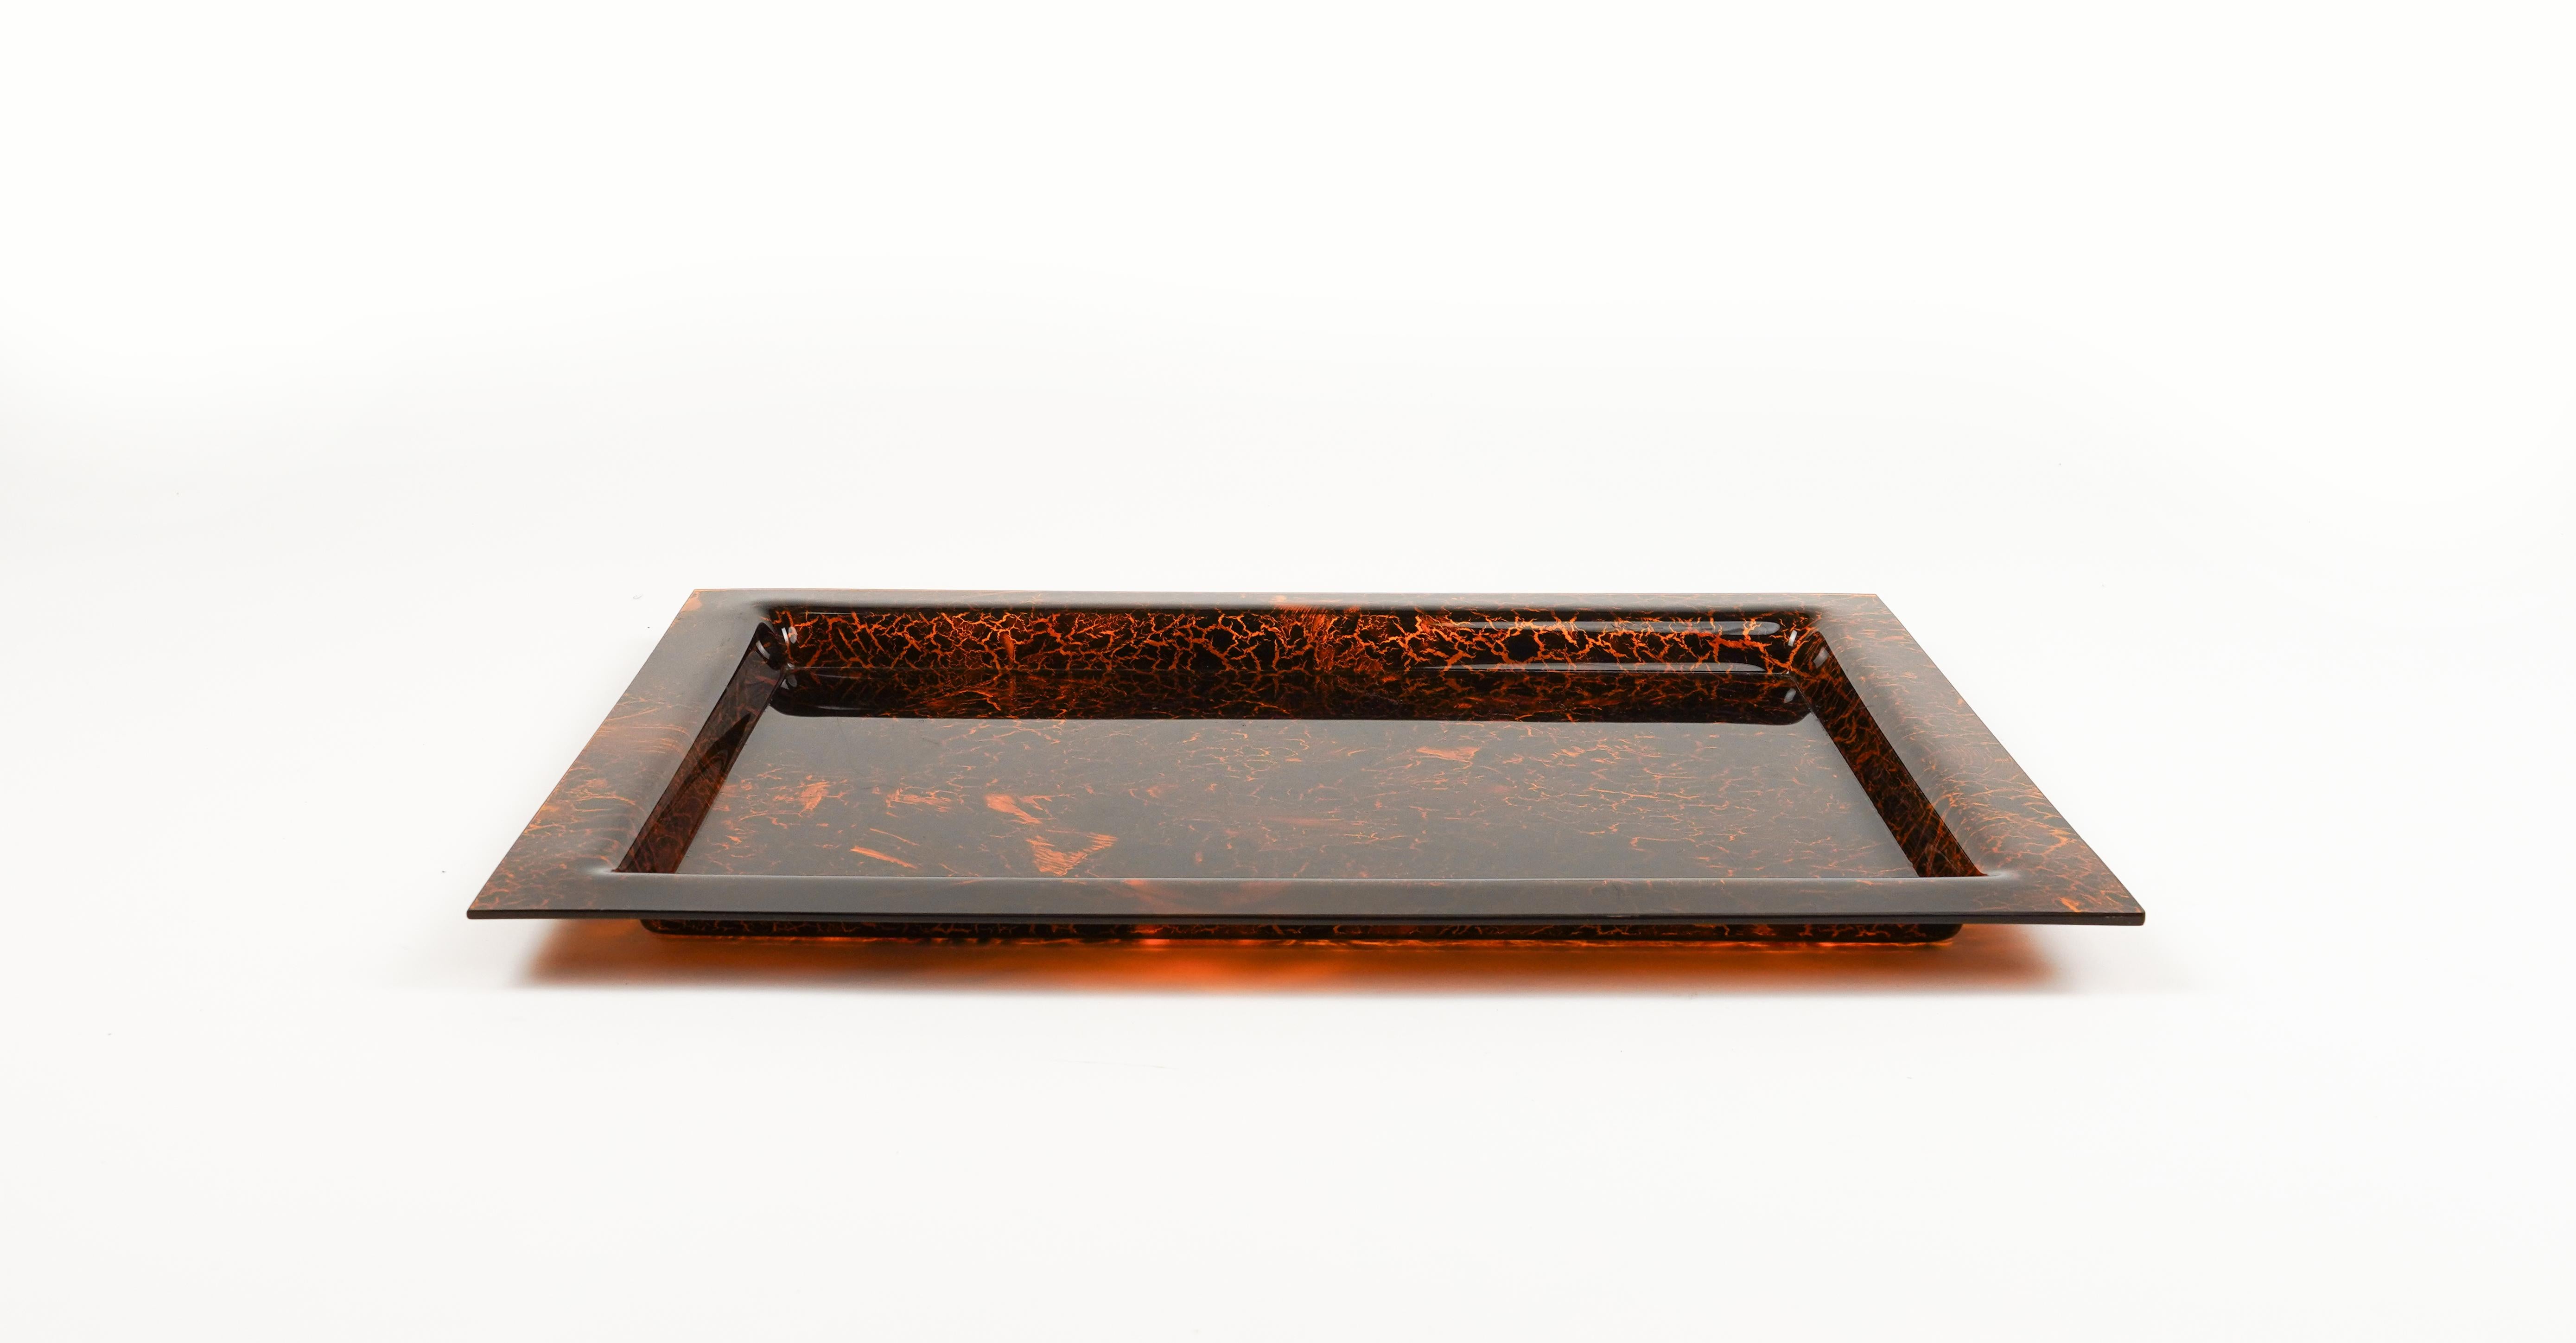 Mid-Century Modern Serving Tray in Effect Tortoiseshell Lucite Christian Dior Style, Italy 1970s For Sale